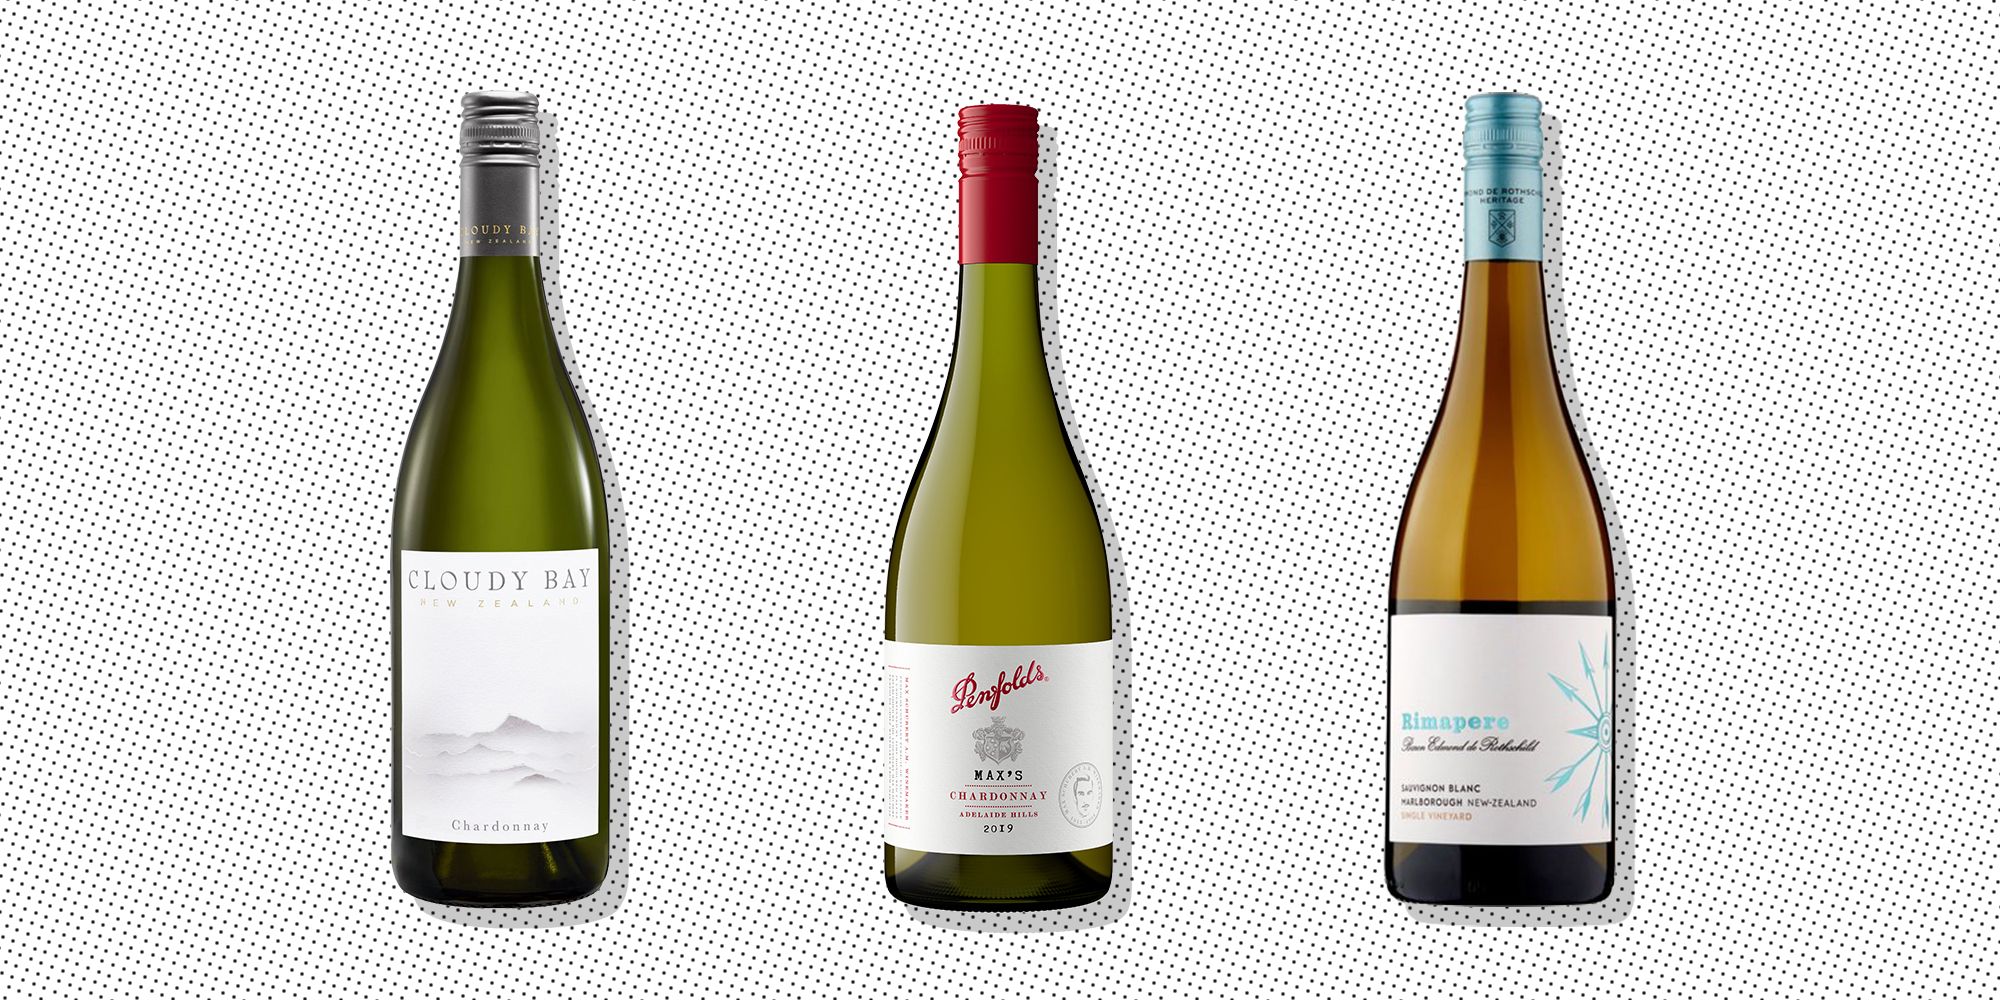 Cloudy Bay: world-famous New Zealand wines